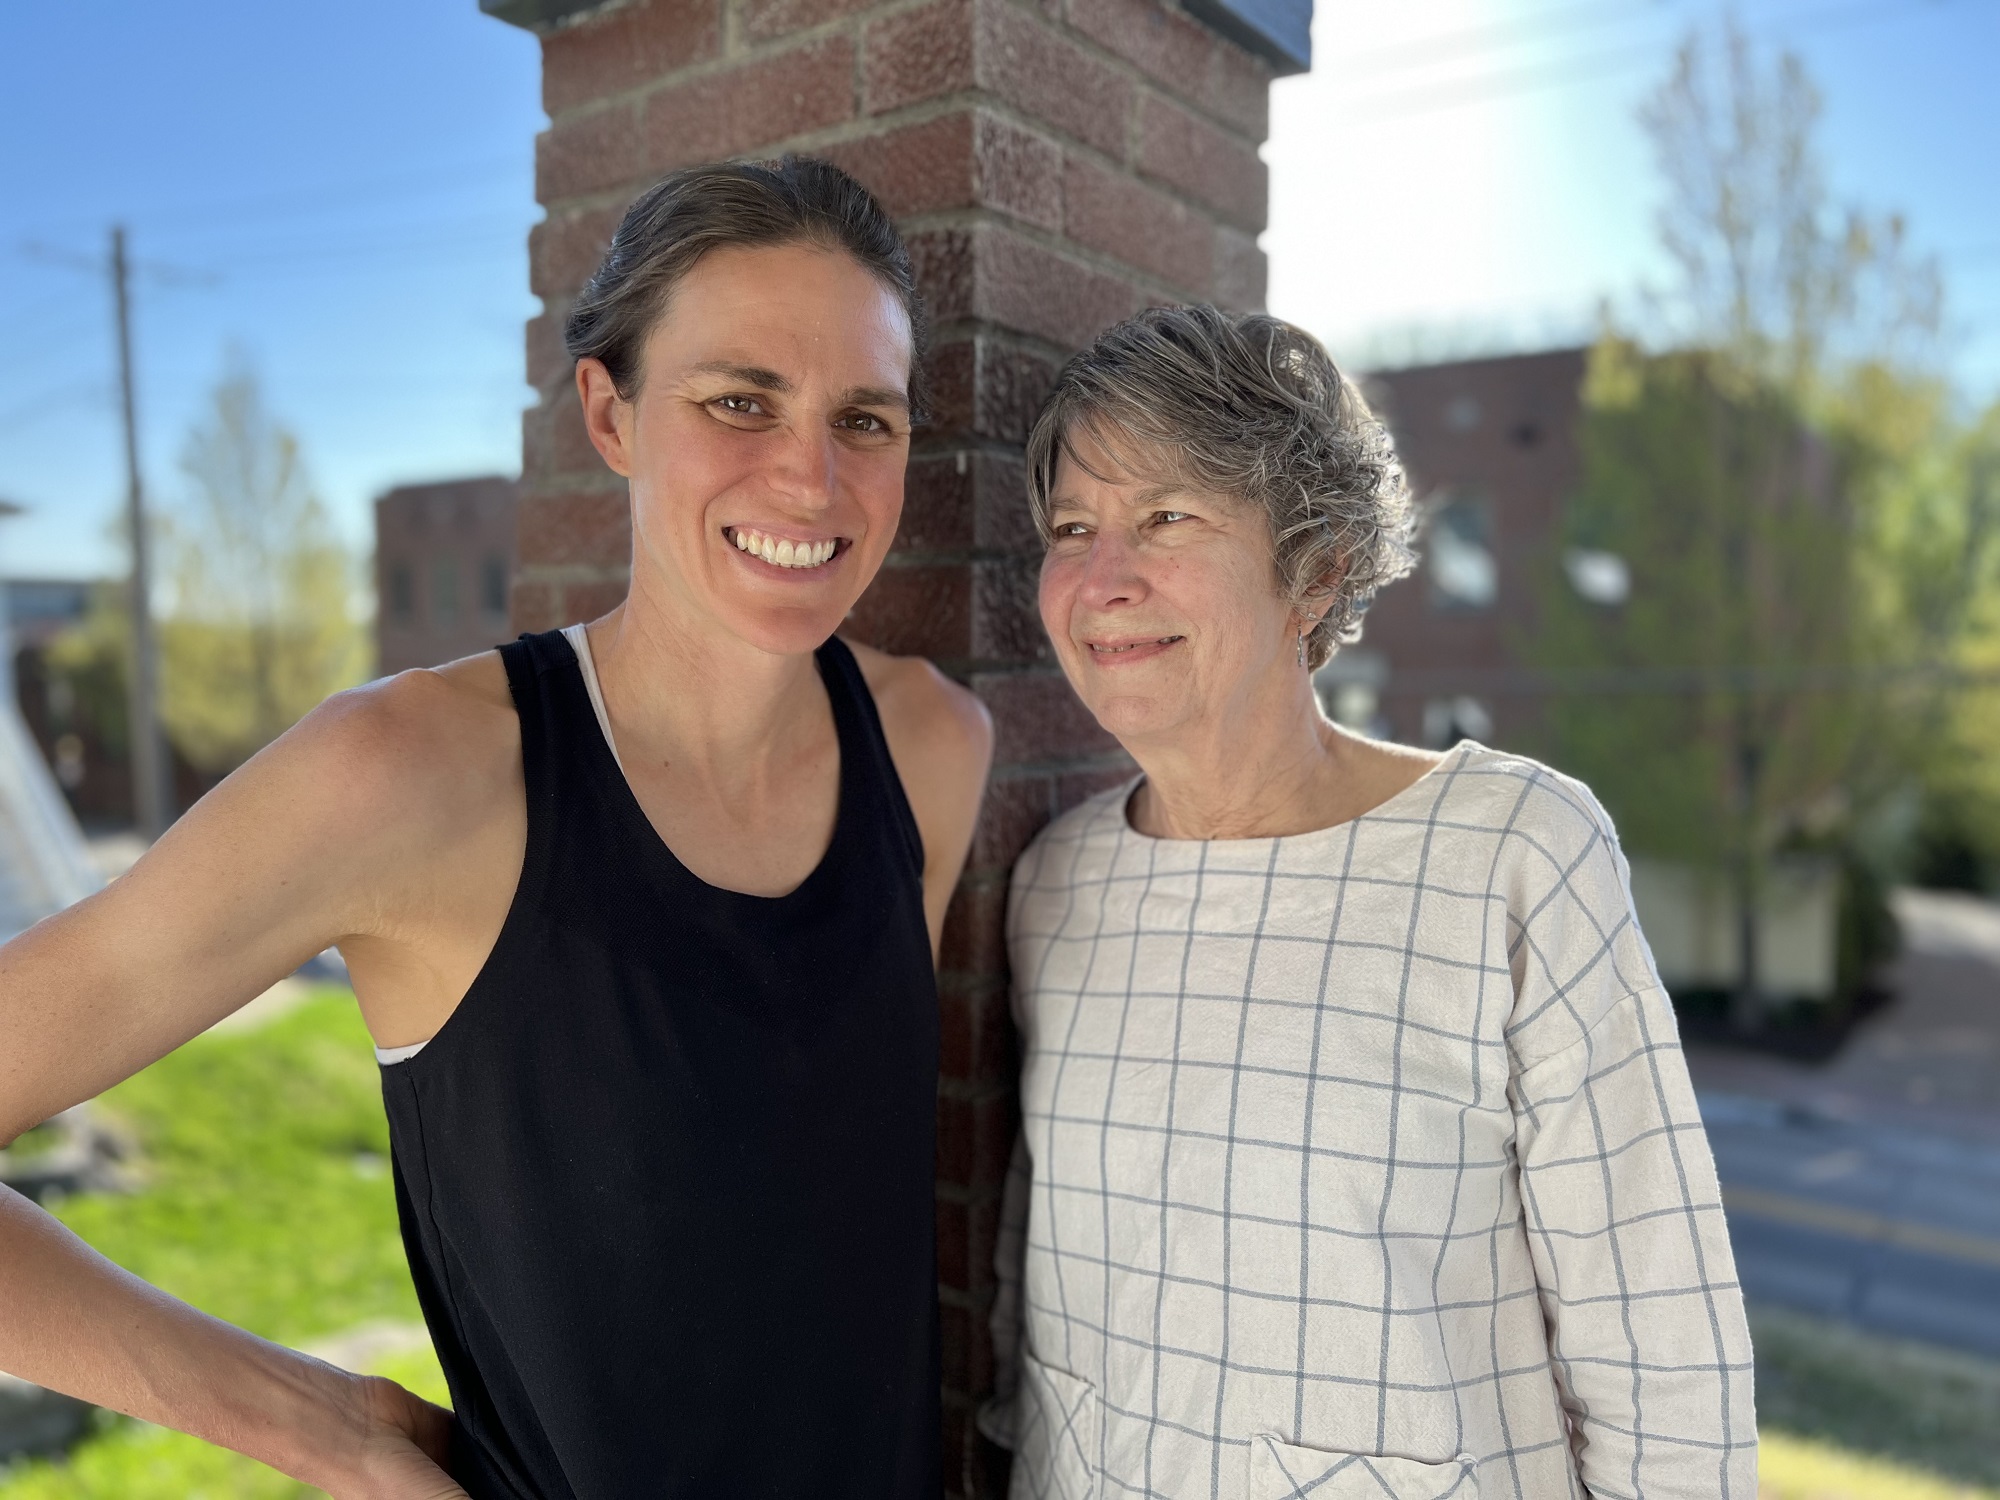 Raising a gold medalist: A parent’s playbook for the unplanned Olympian